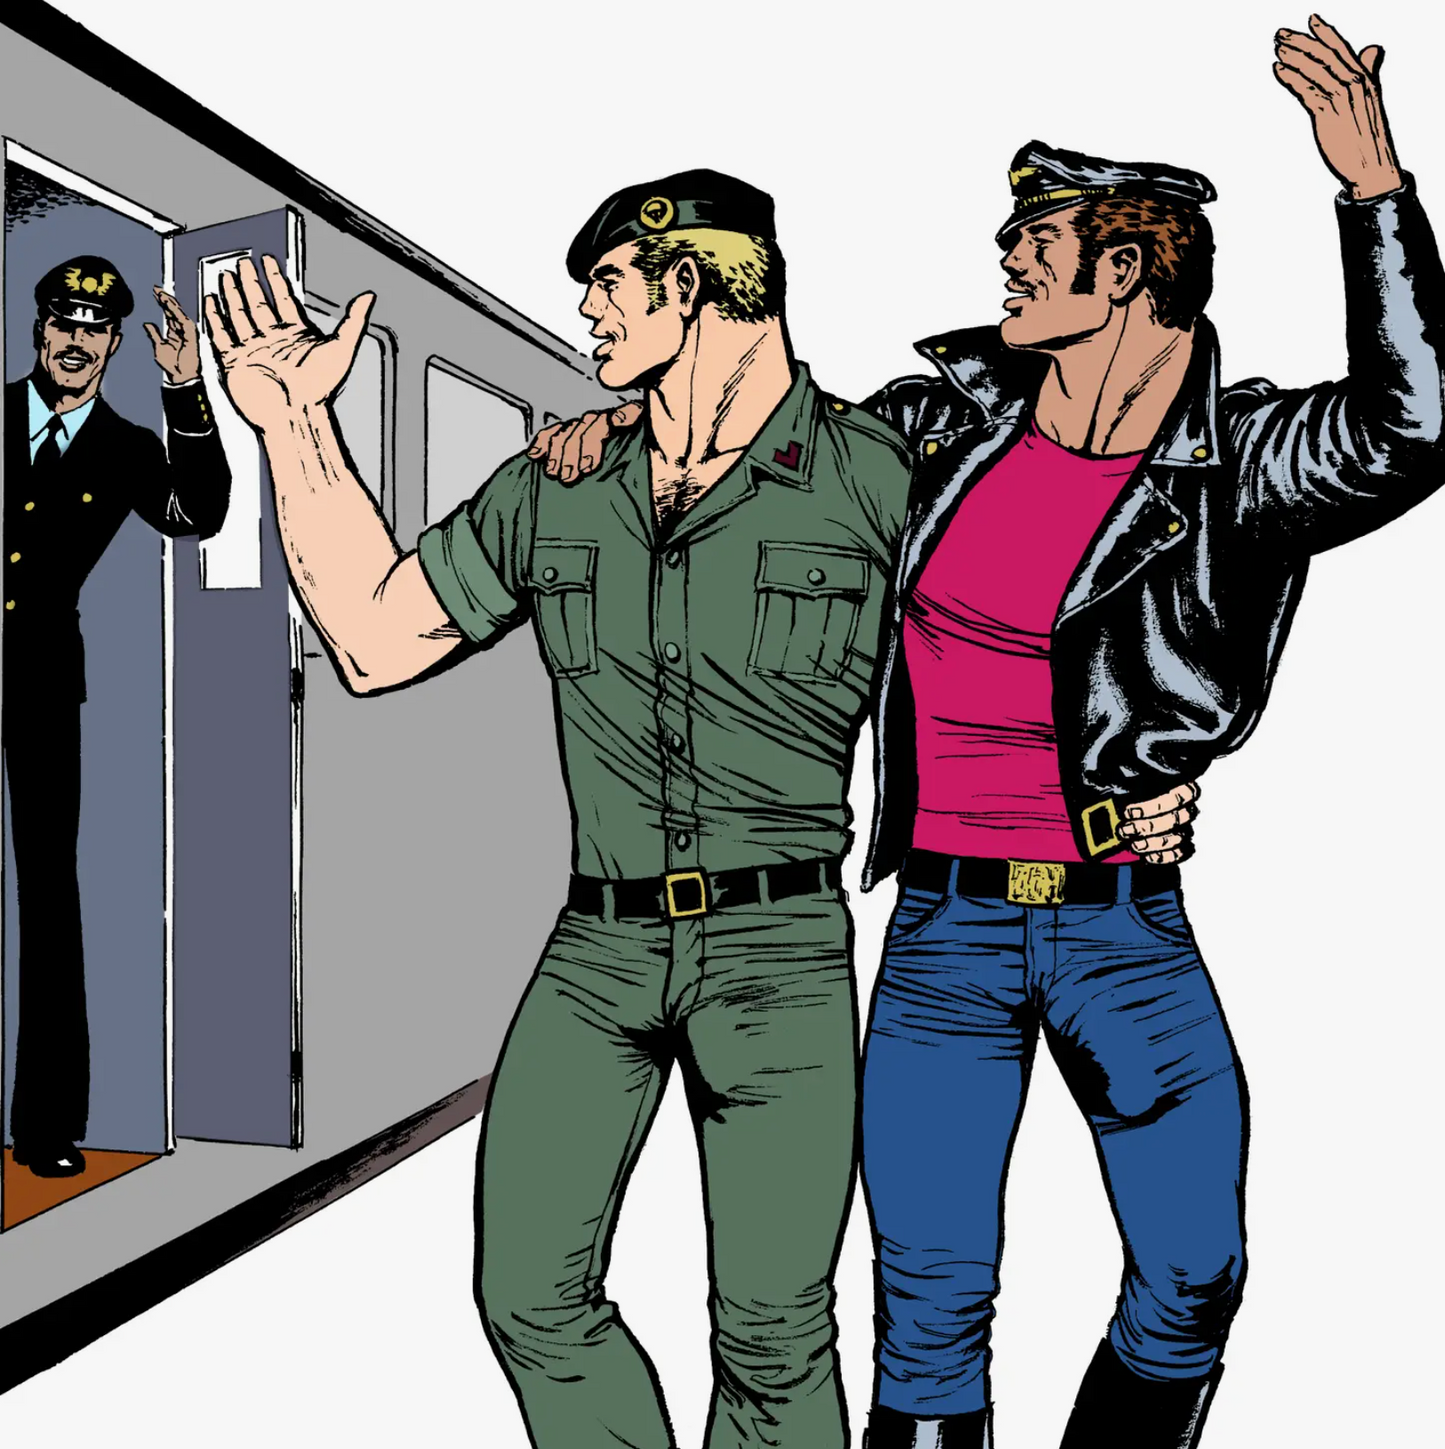 Tom of Finland Adult Coloring Book